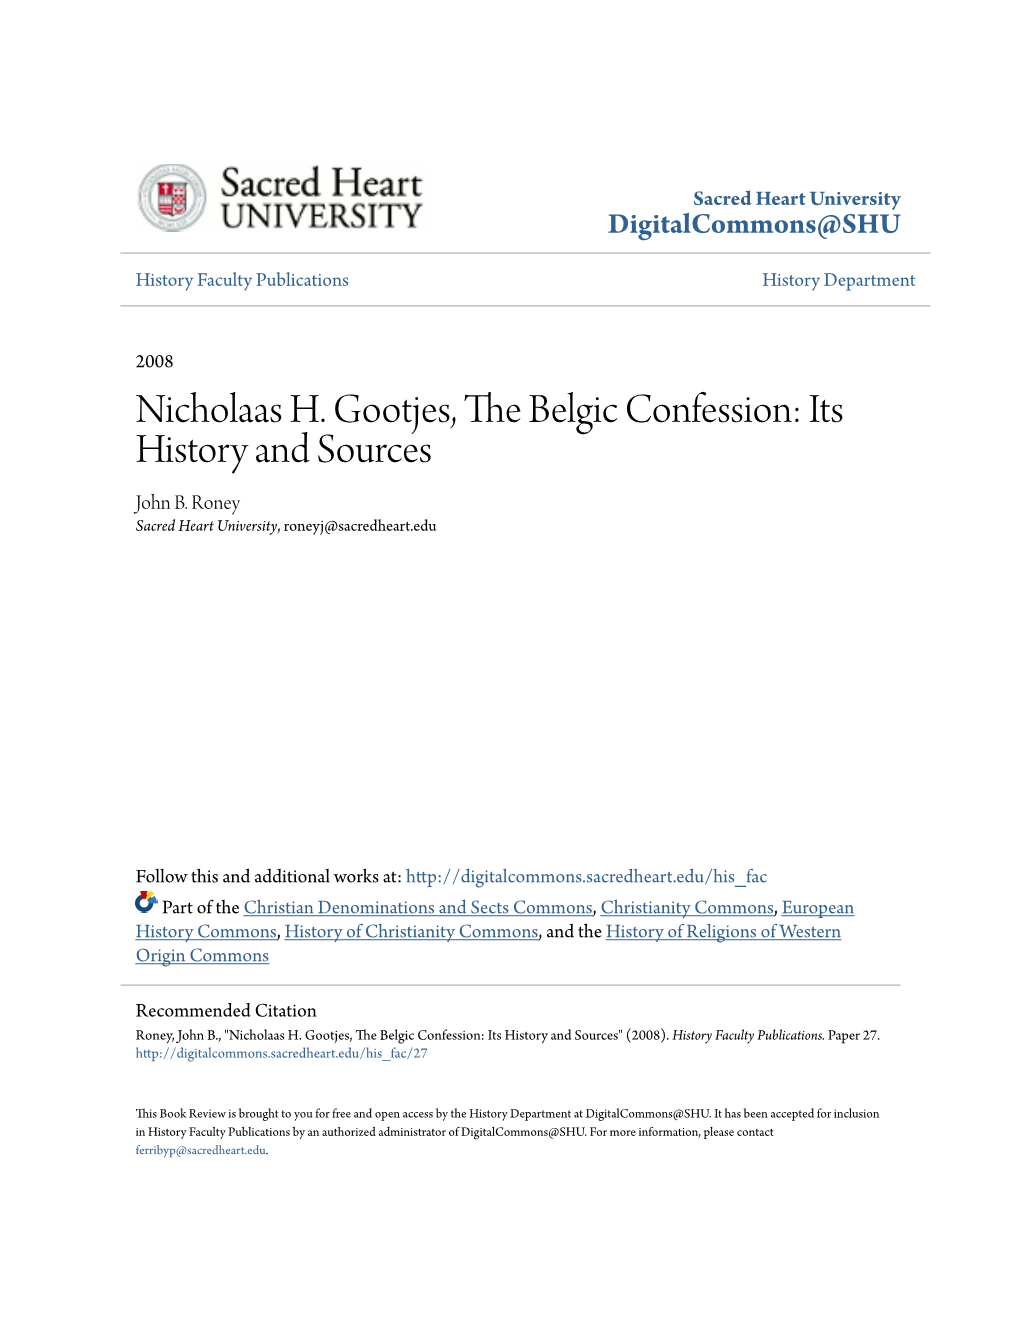 Nicholaas H. Gootjes, the Belgic Confession: Its History and Sources John B